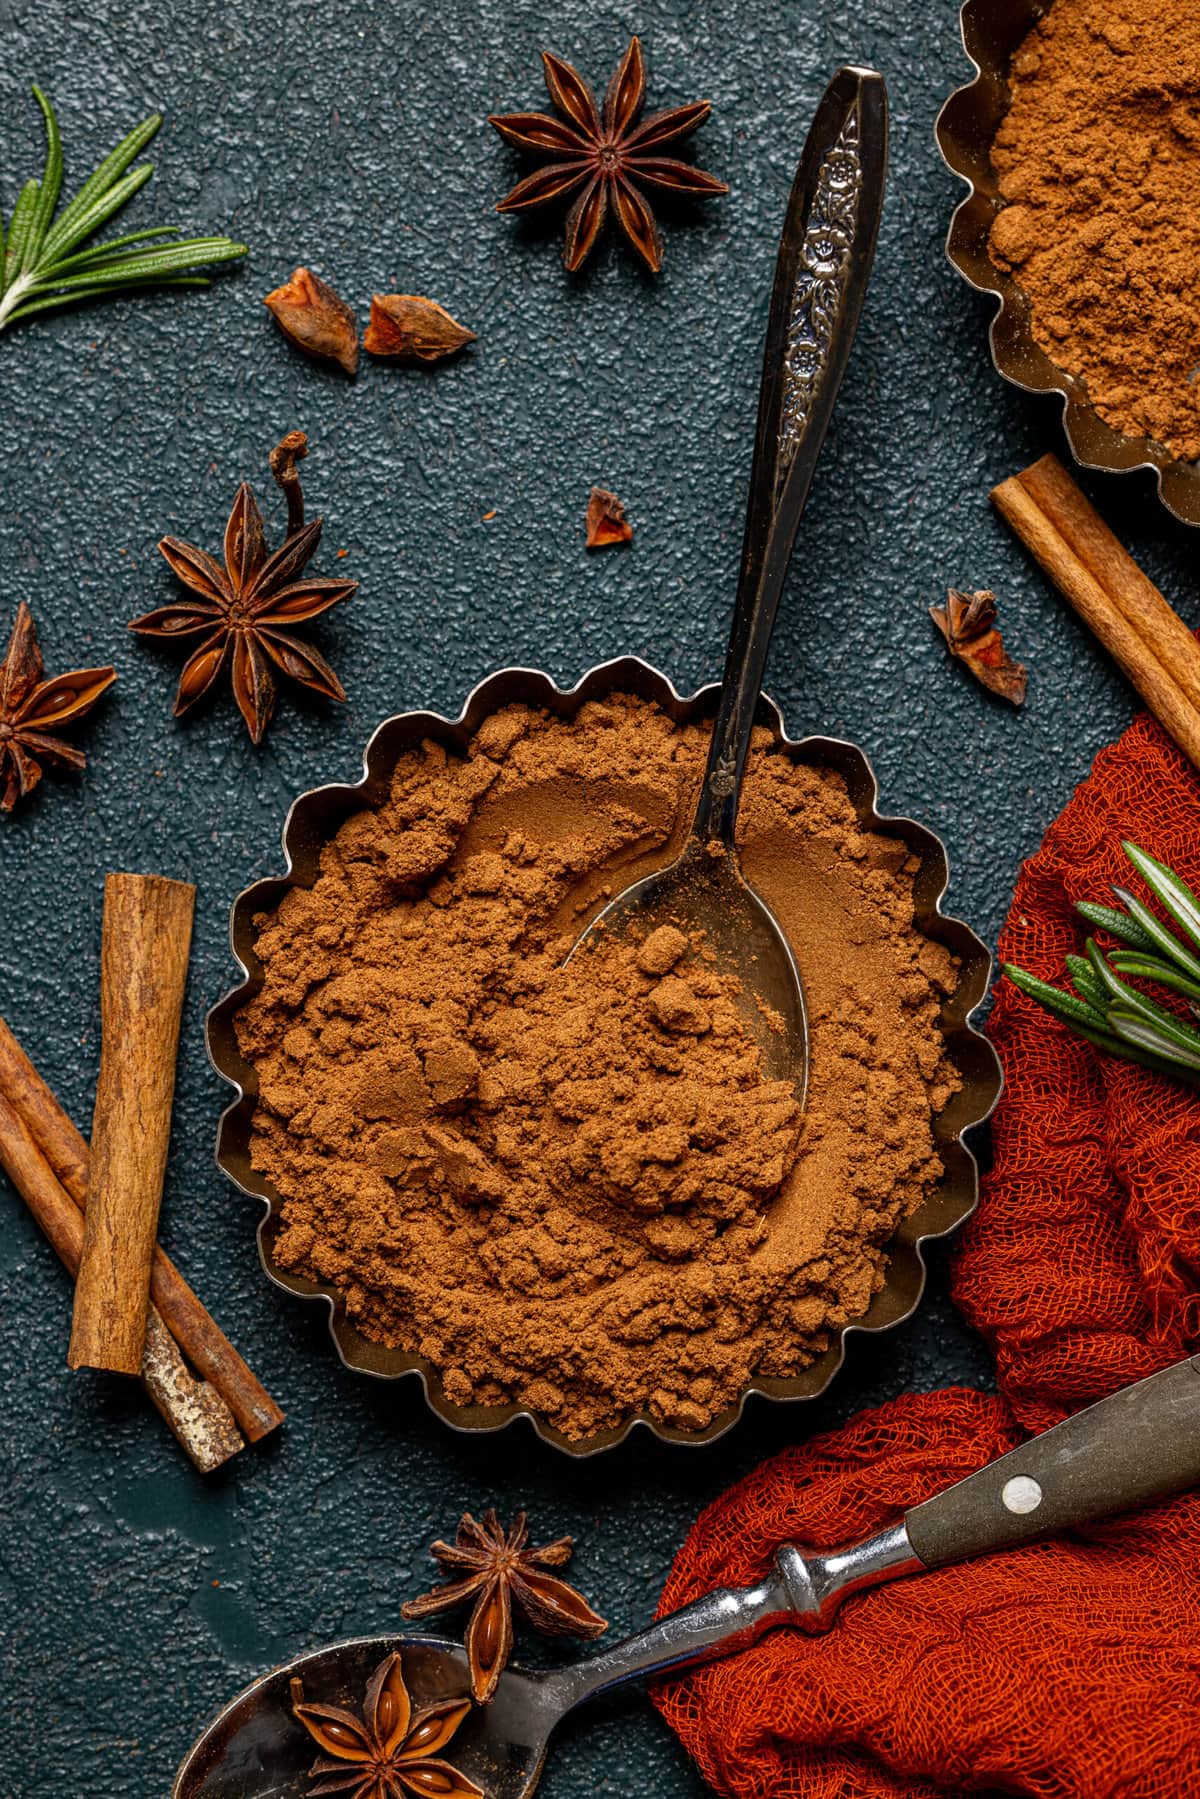 Pumpkin spice blend in a small tin with a spoon, cinnamon stick, and spices as garnish.